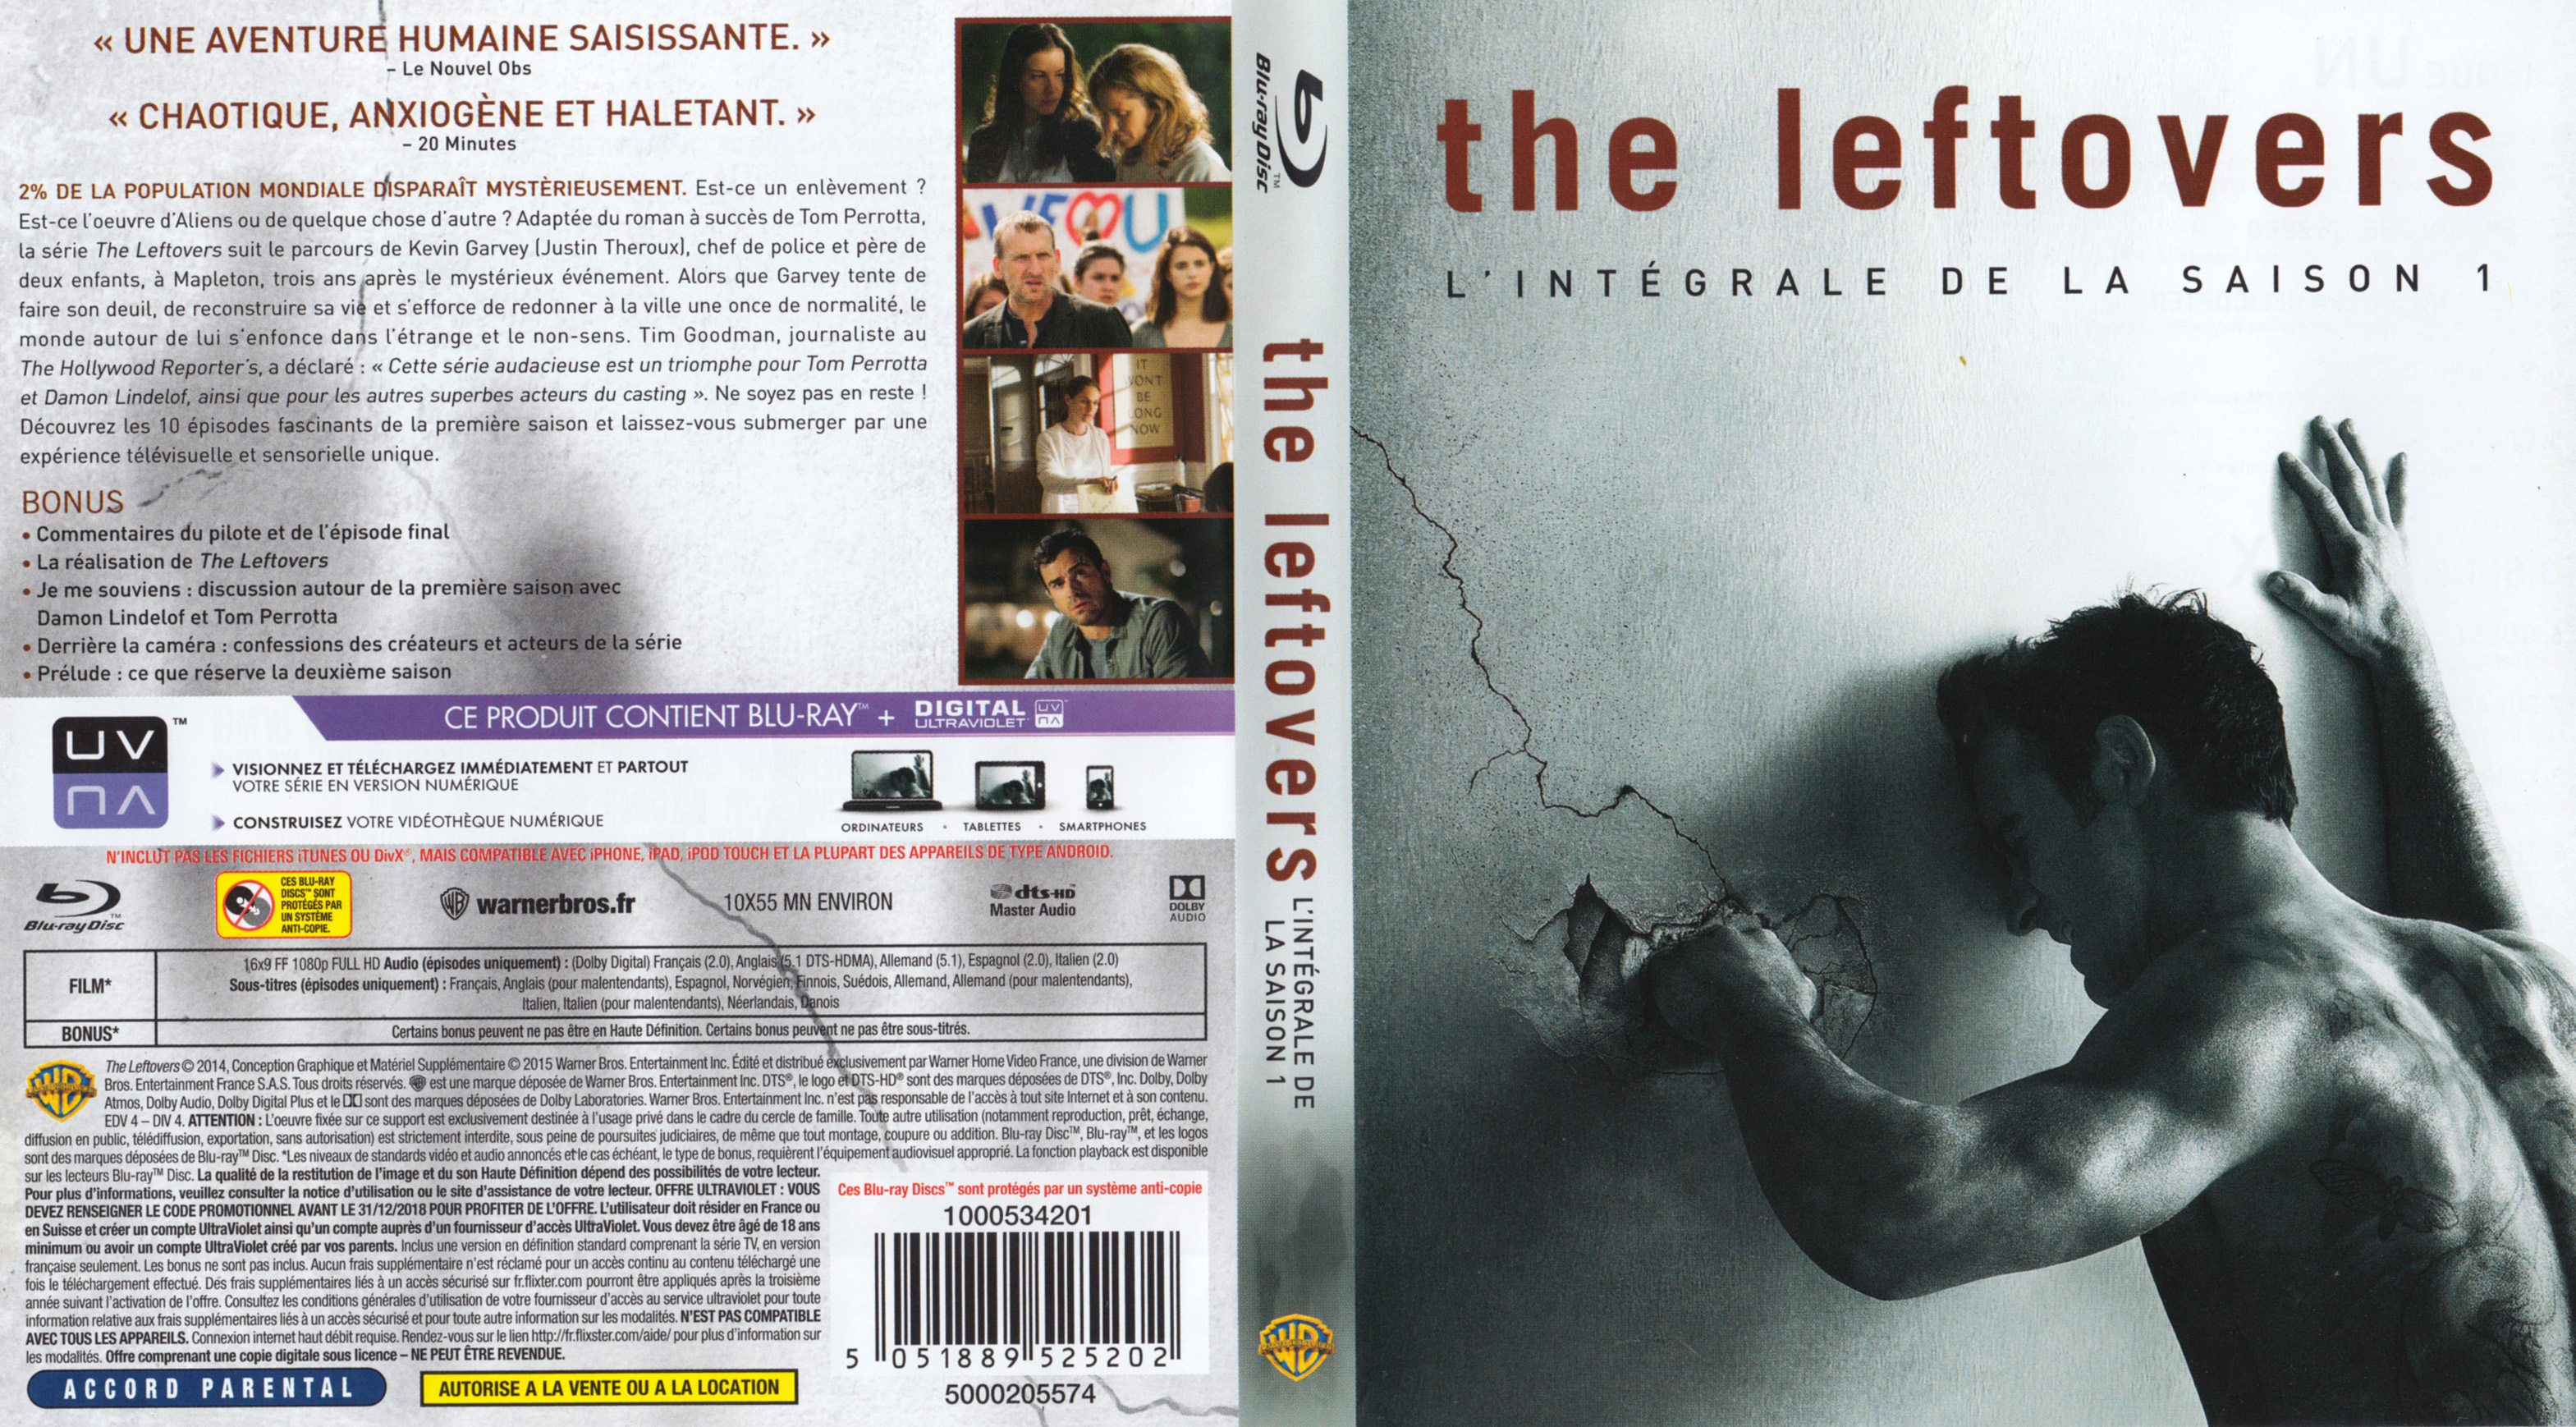 Jaquette DVD The leftovers Saison 1 (BLU-RAY)